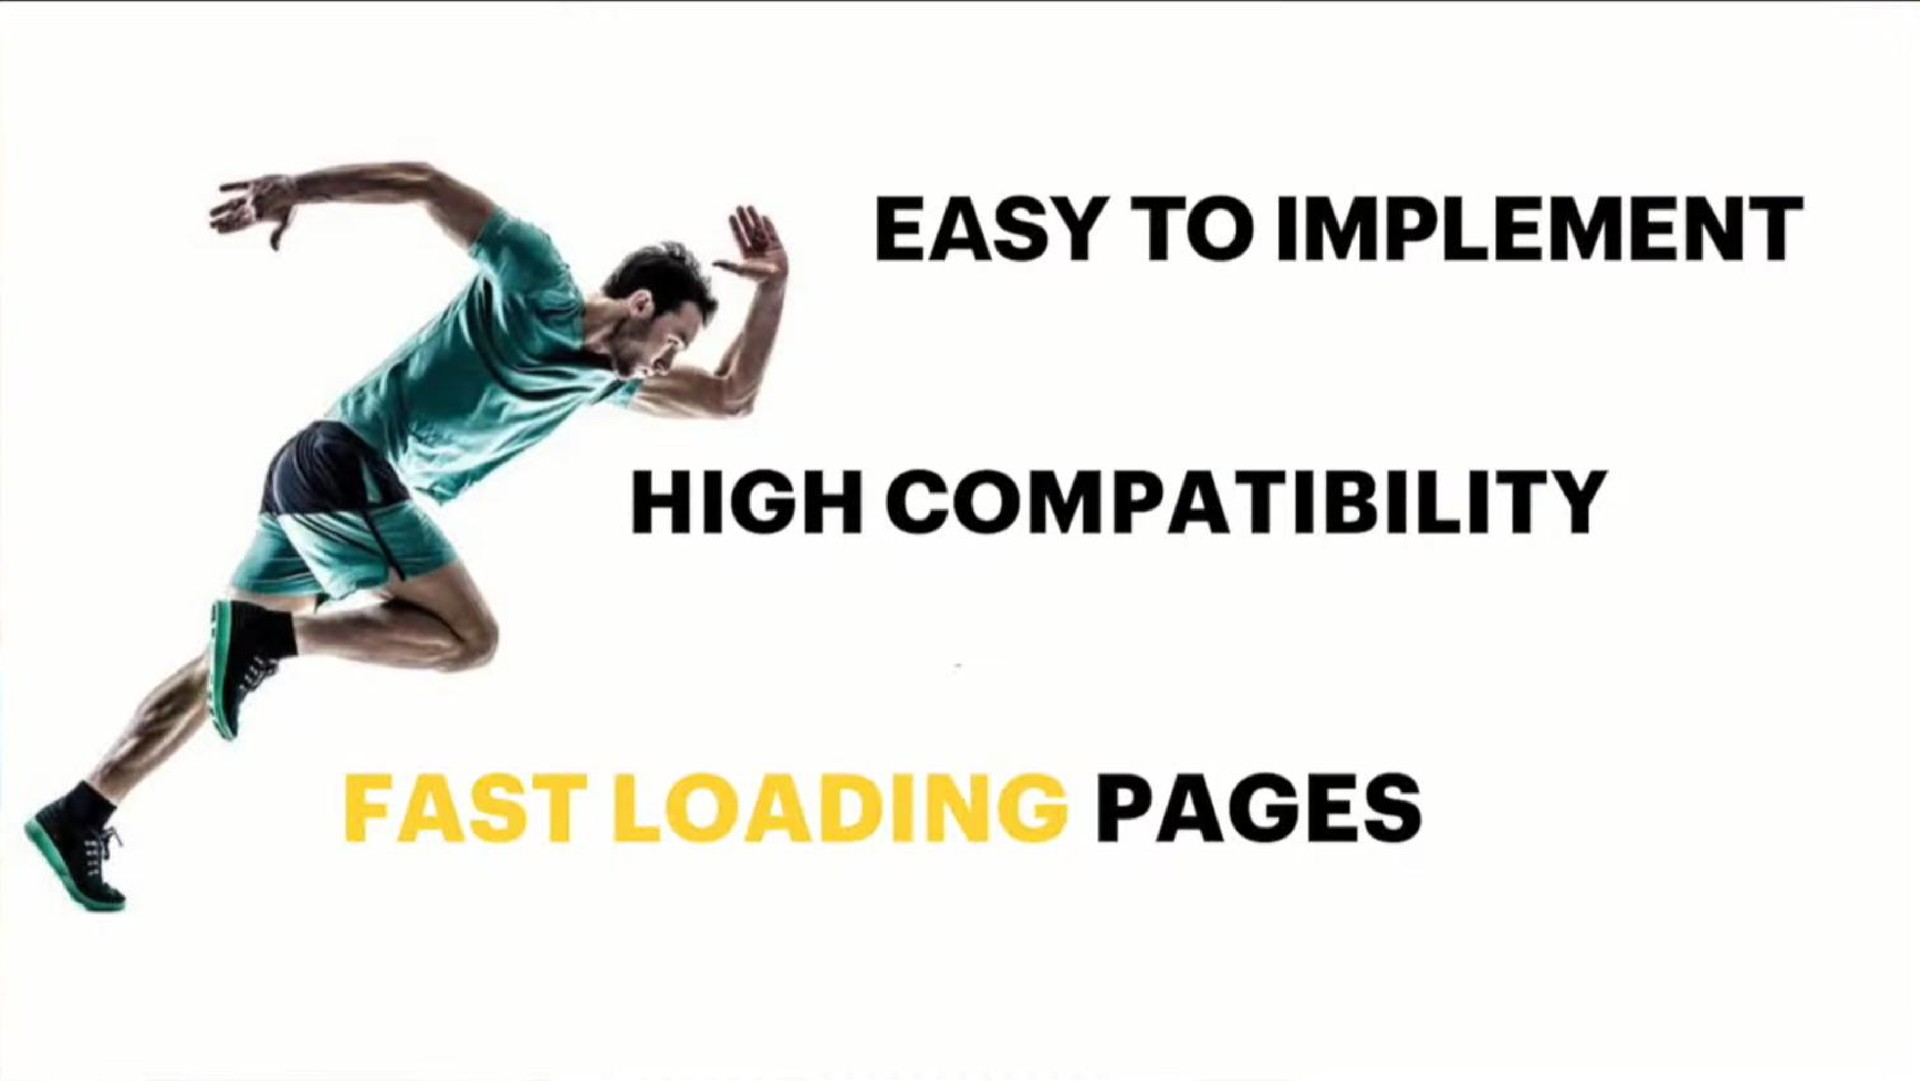 easy to implement pages | RoboAMP